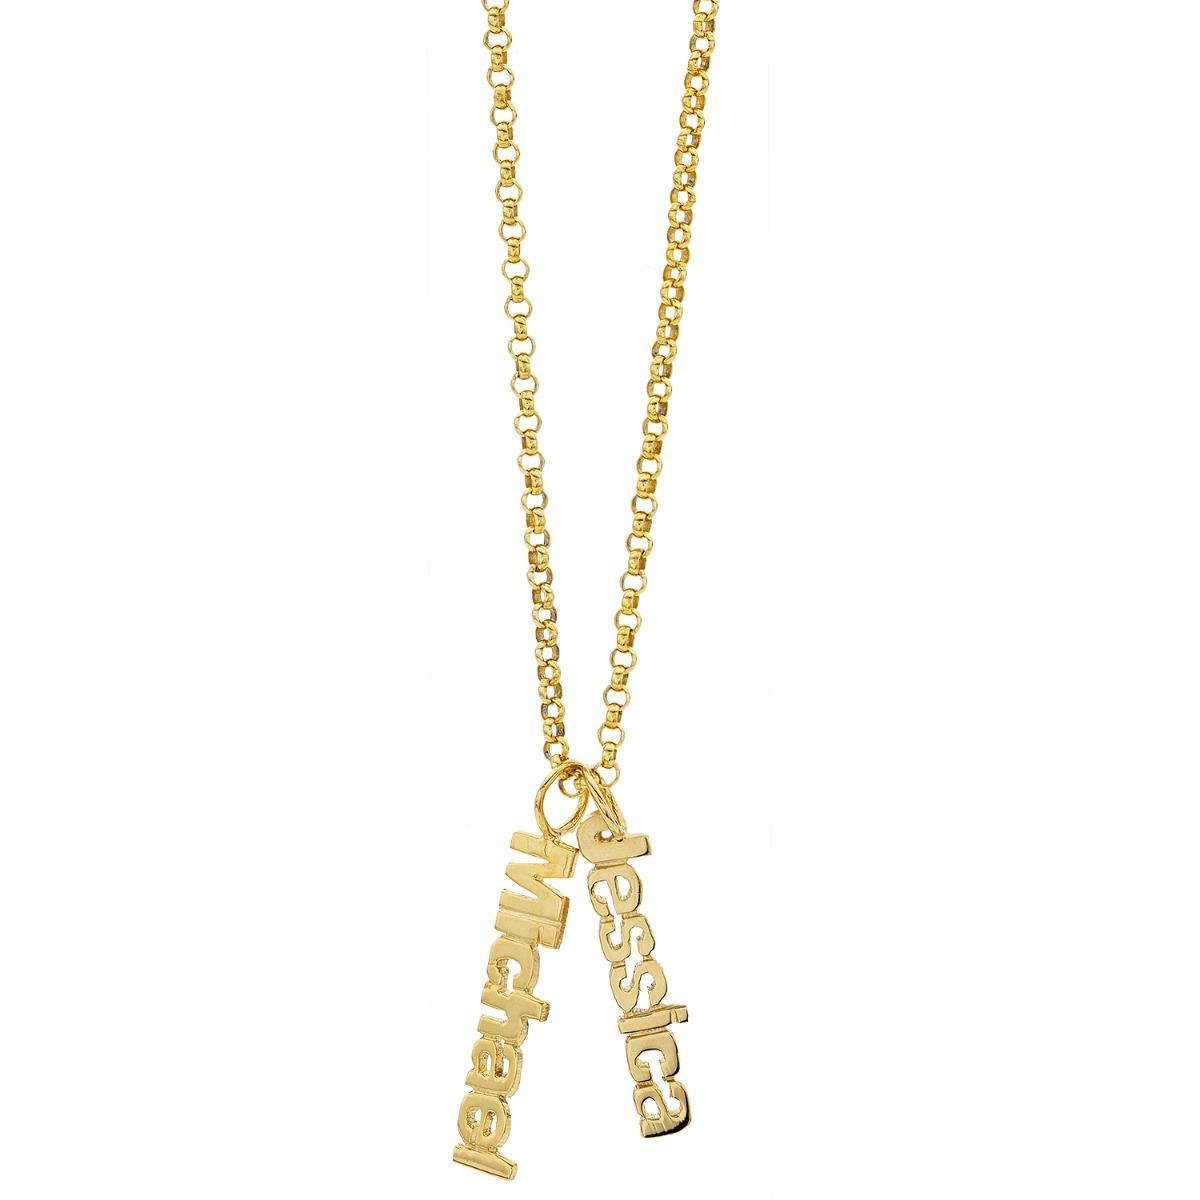 Gold Plated Double Name Charm Necklace